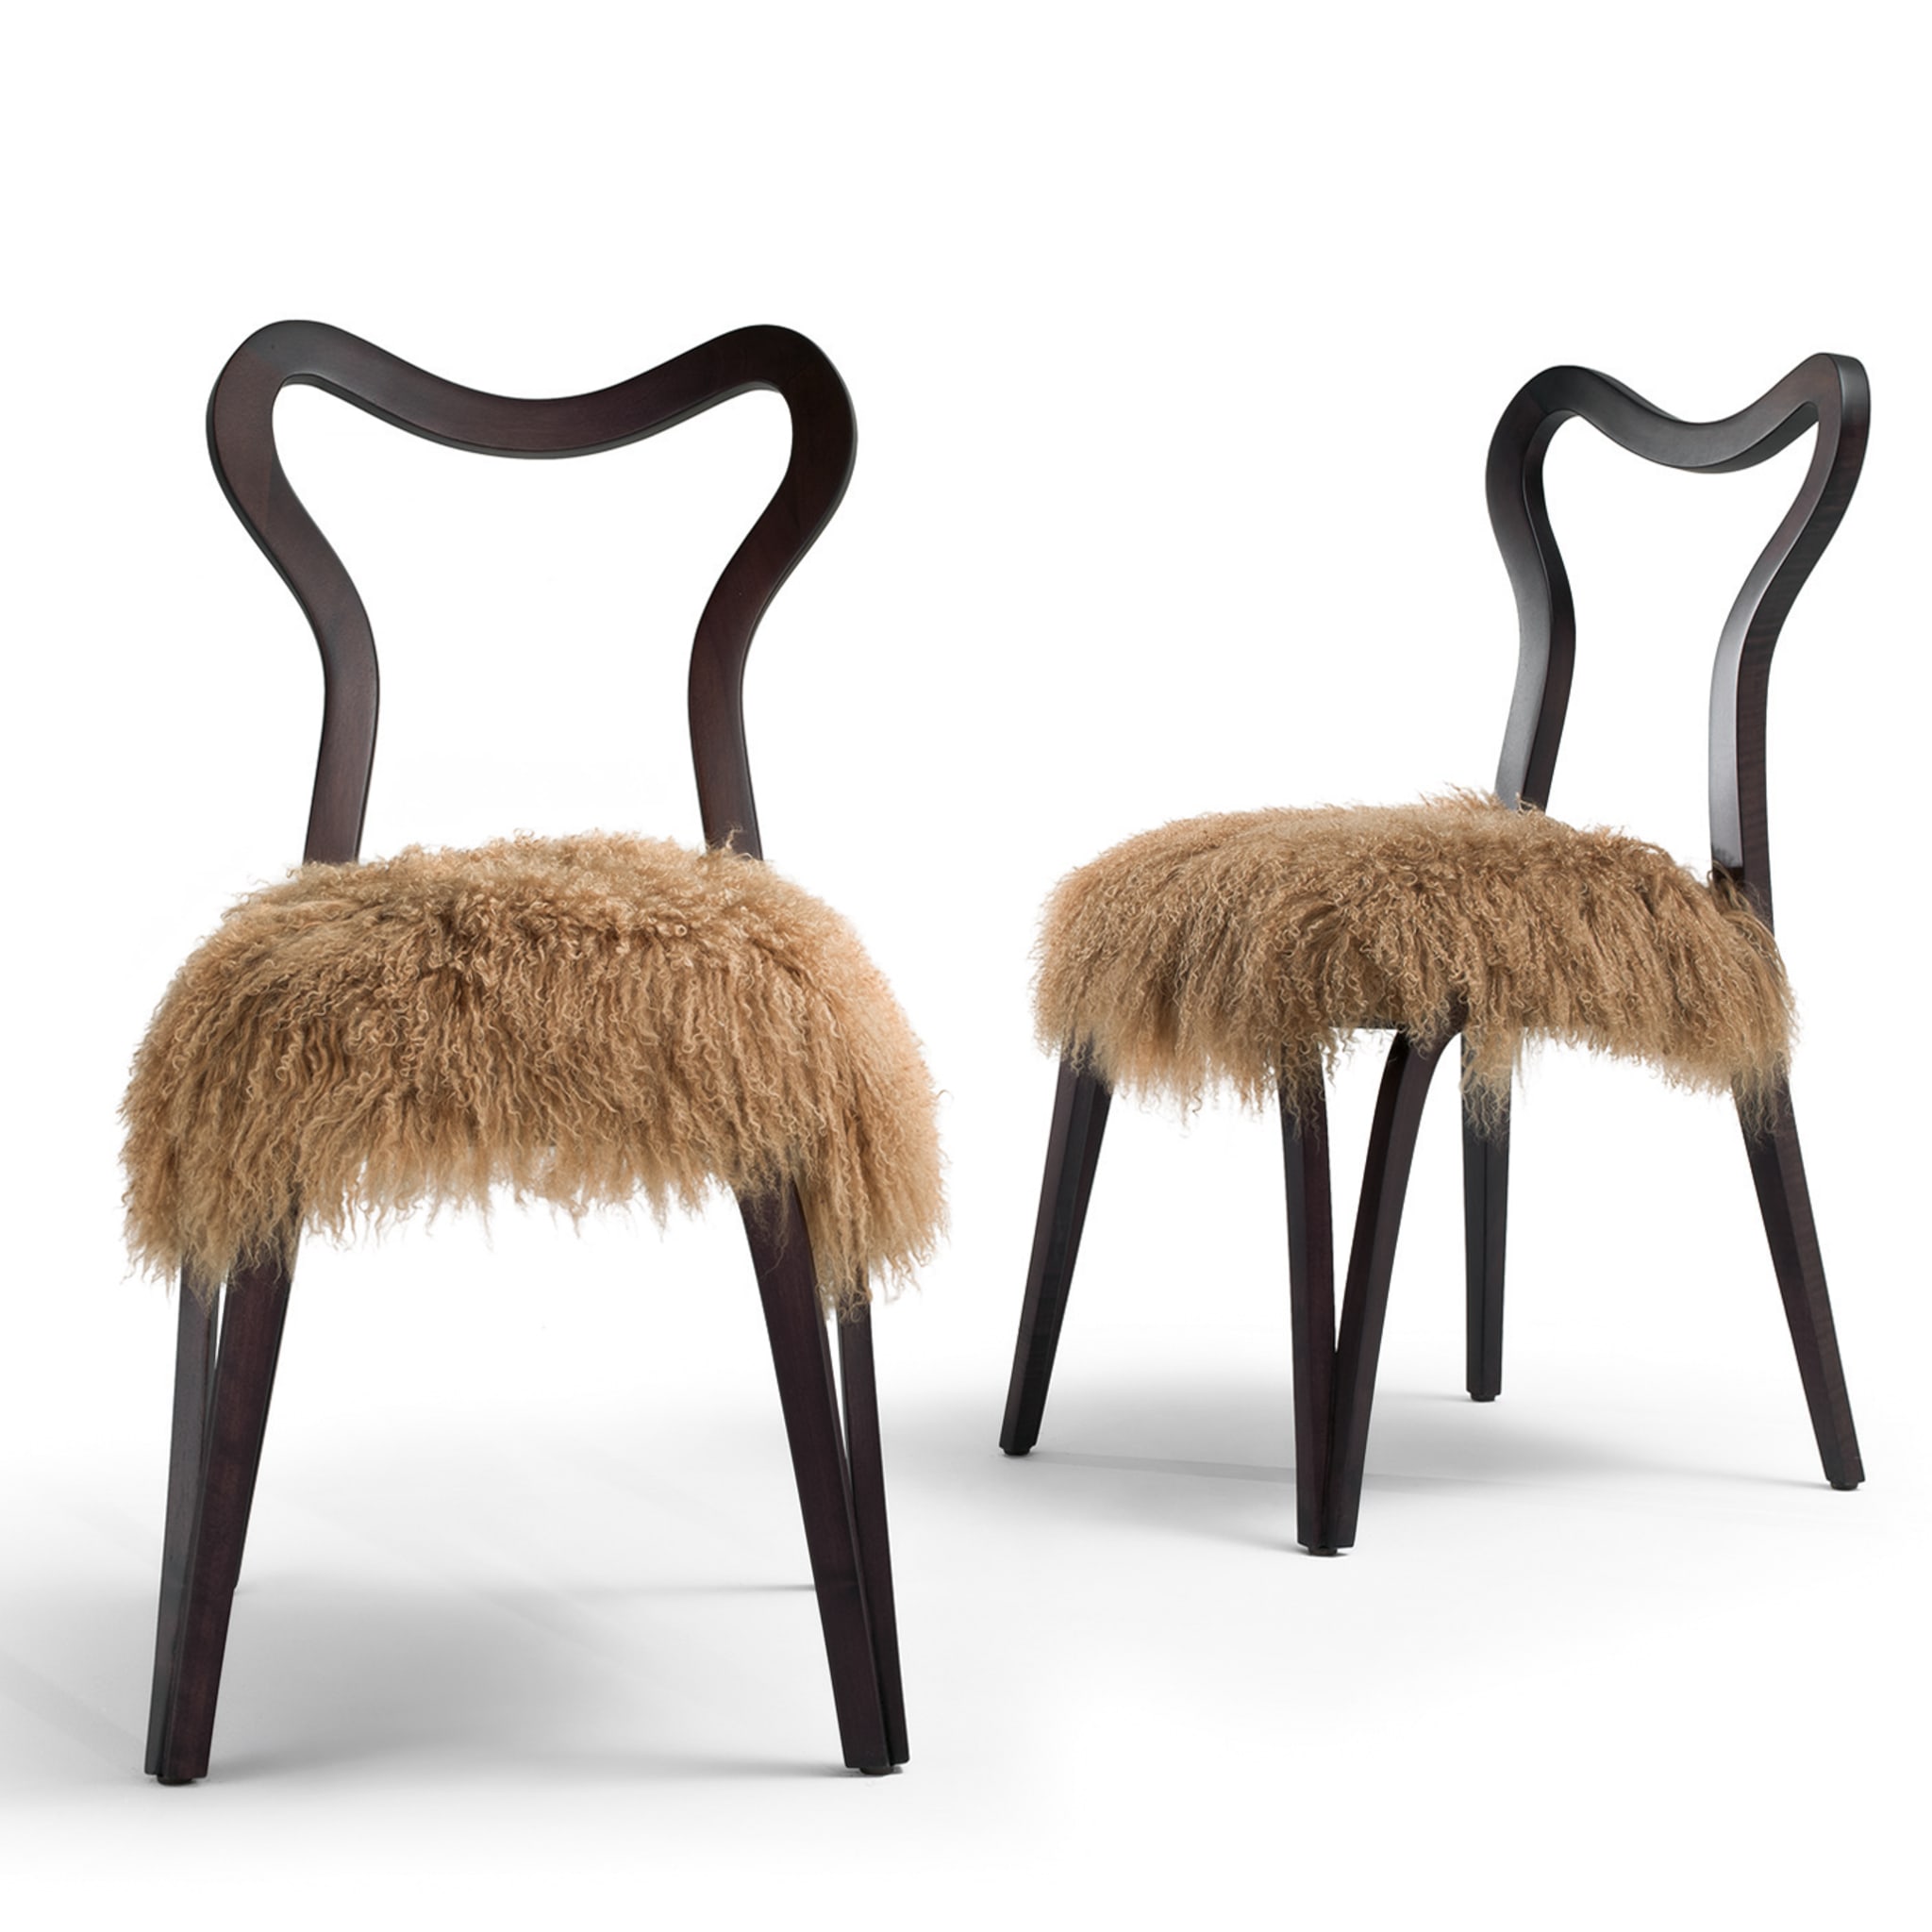 Daina Dining Chair by Nigel Coates - Alternative view 1